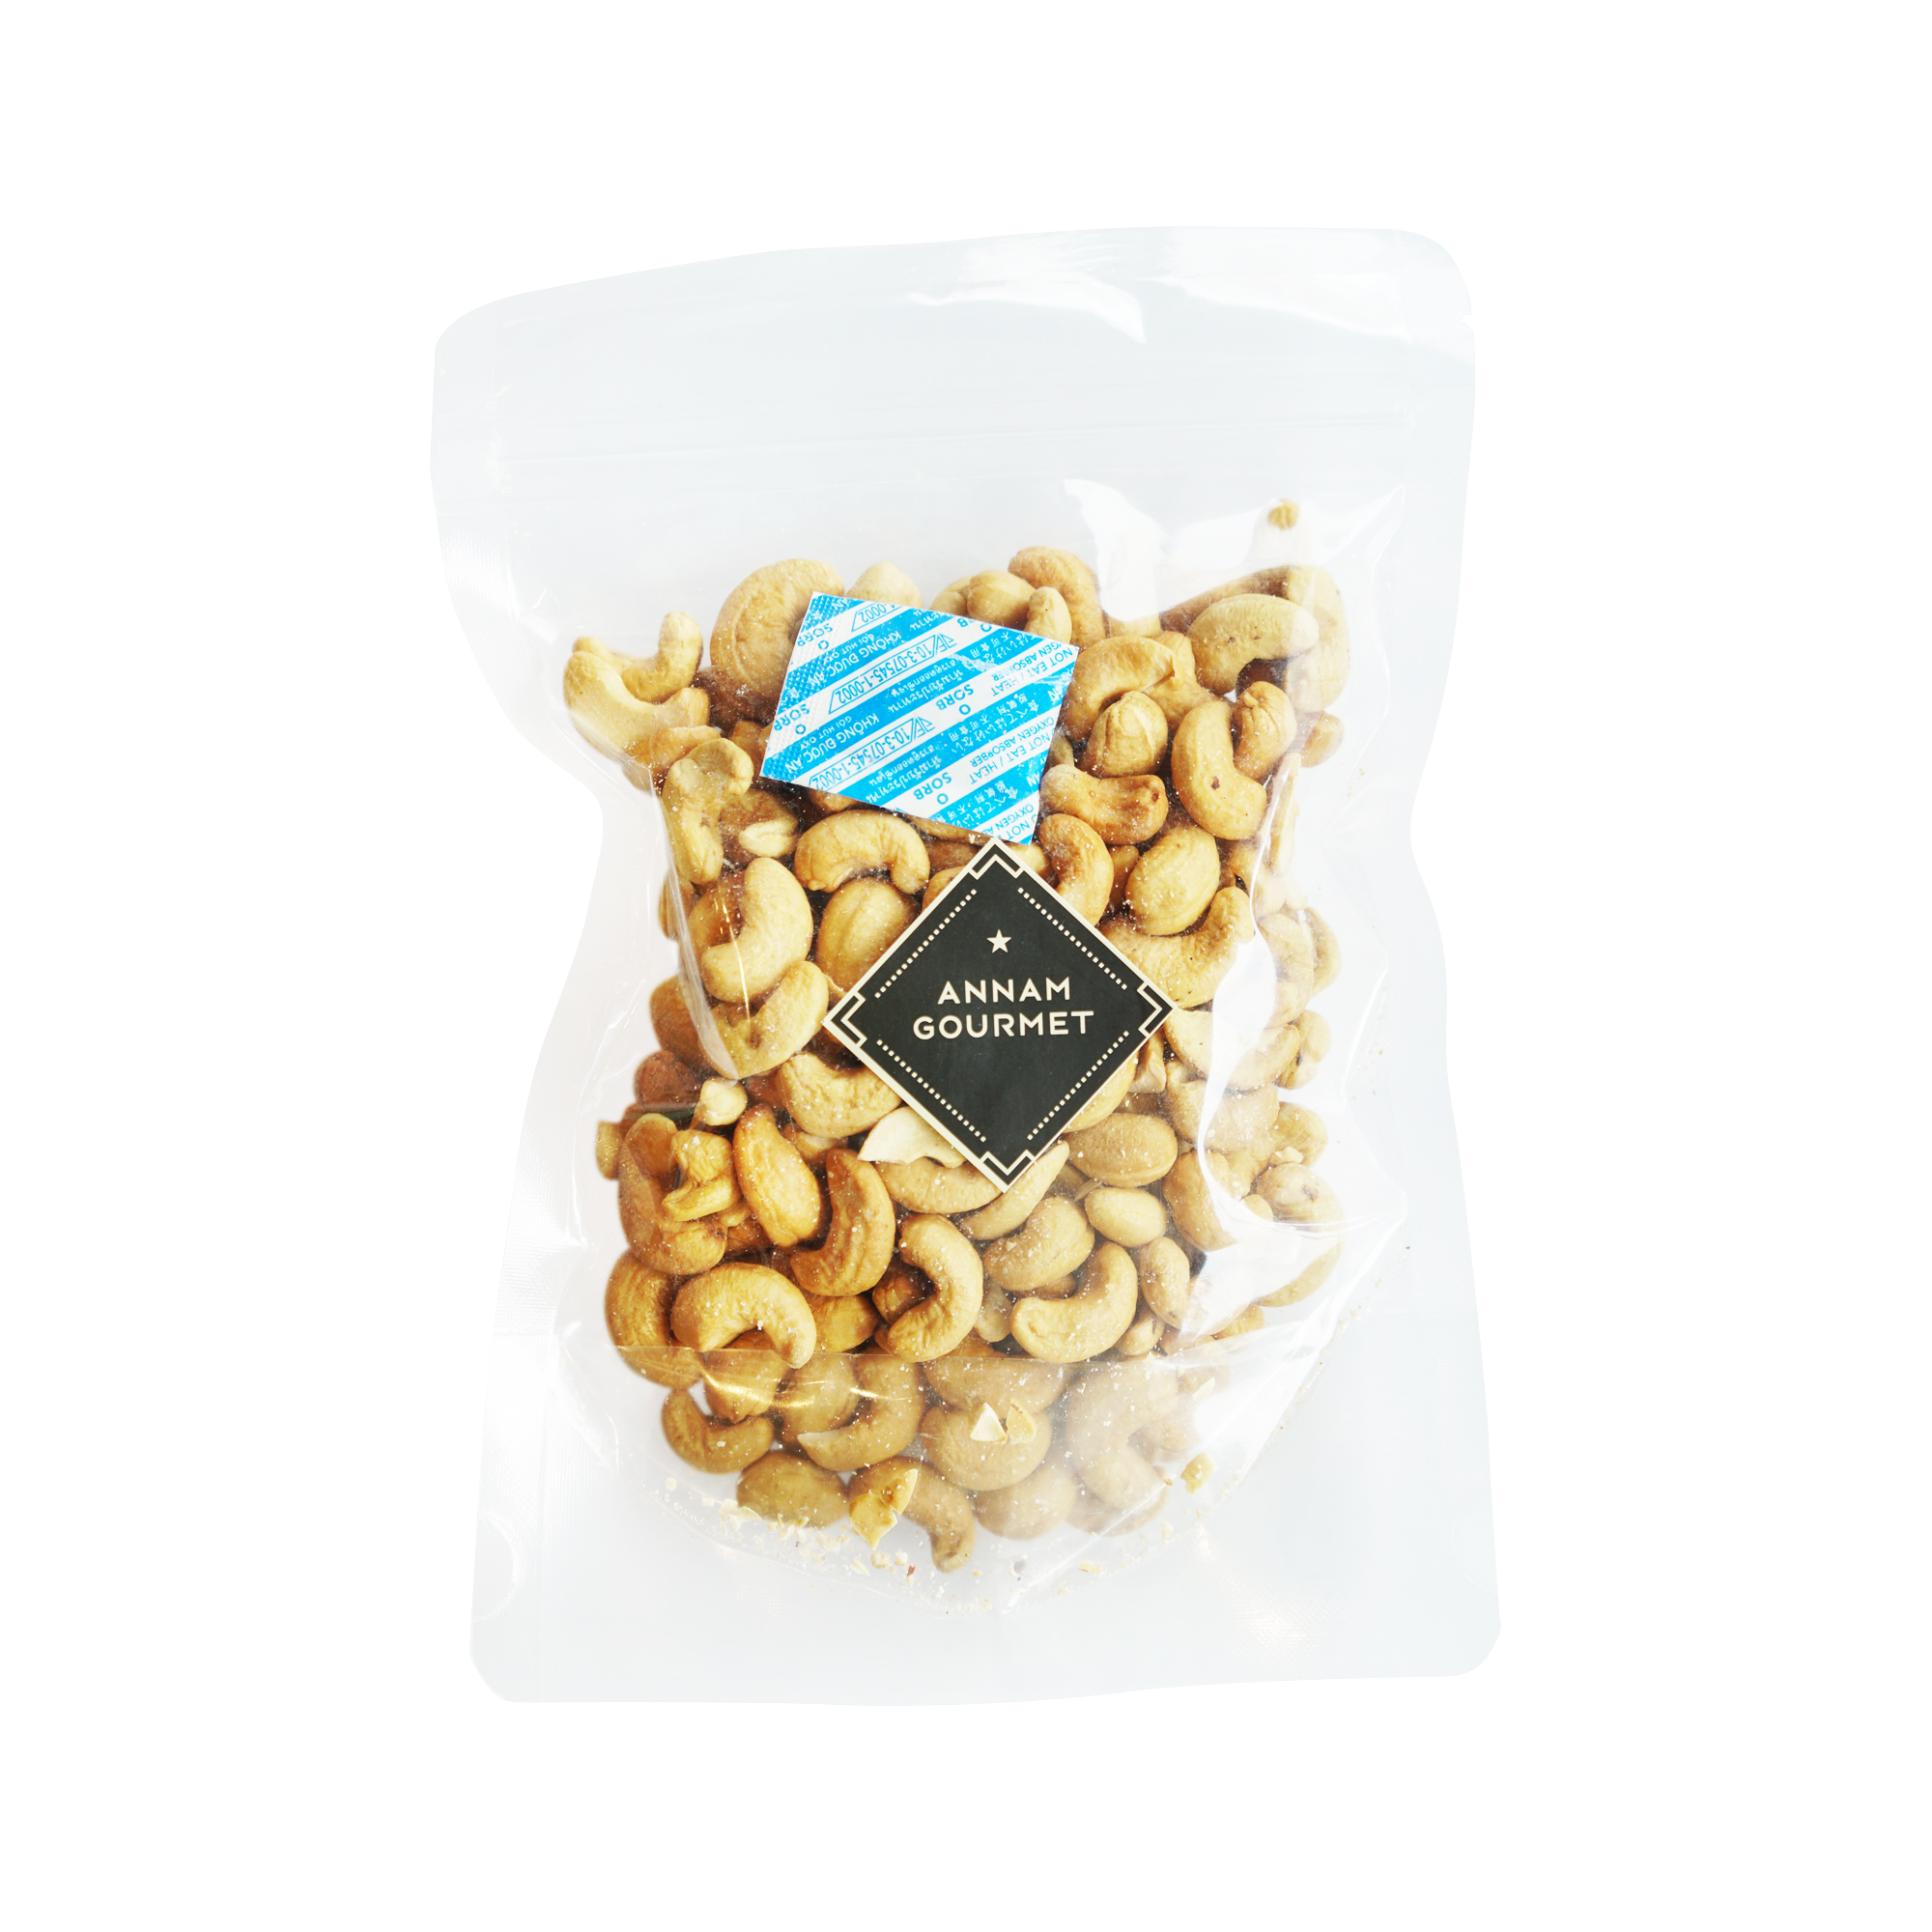 Annam Gourmet Roasted Cashew Nuts Skinless (200g)